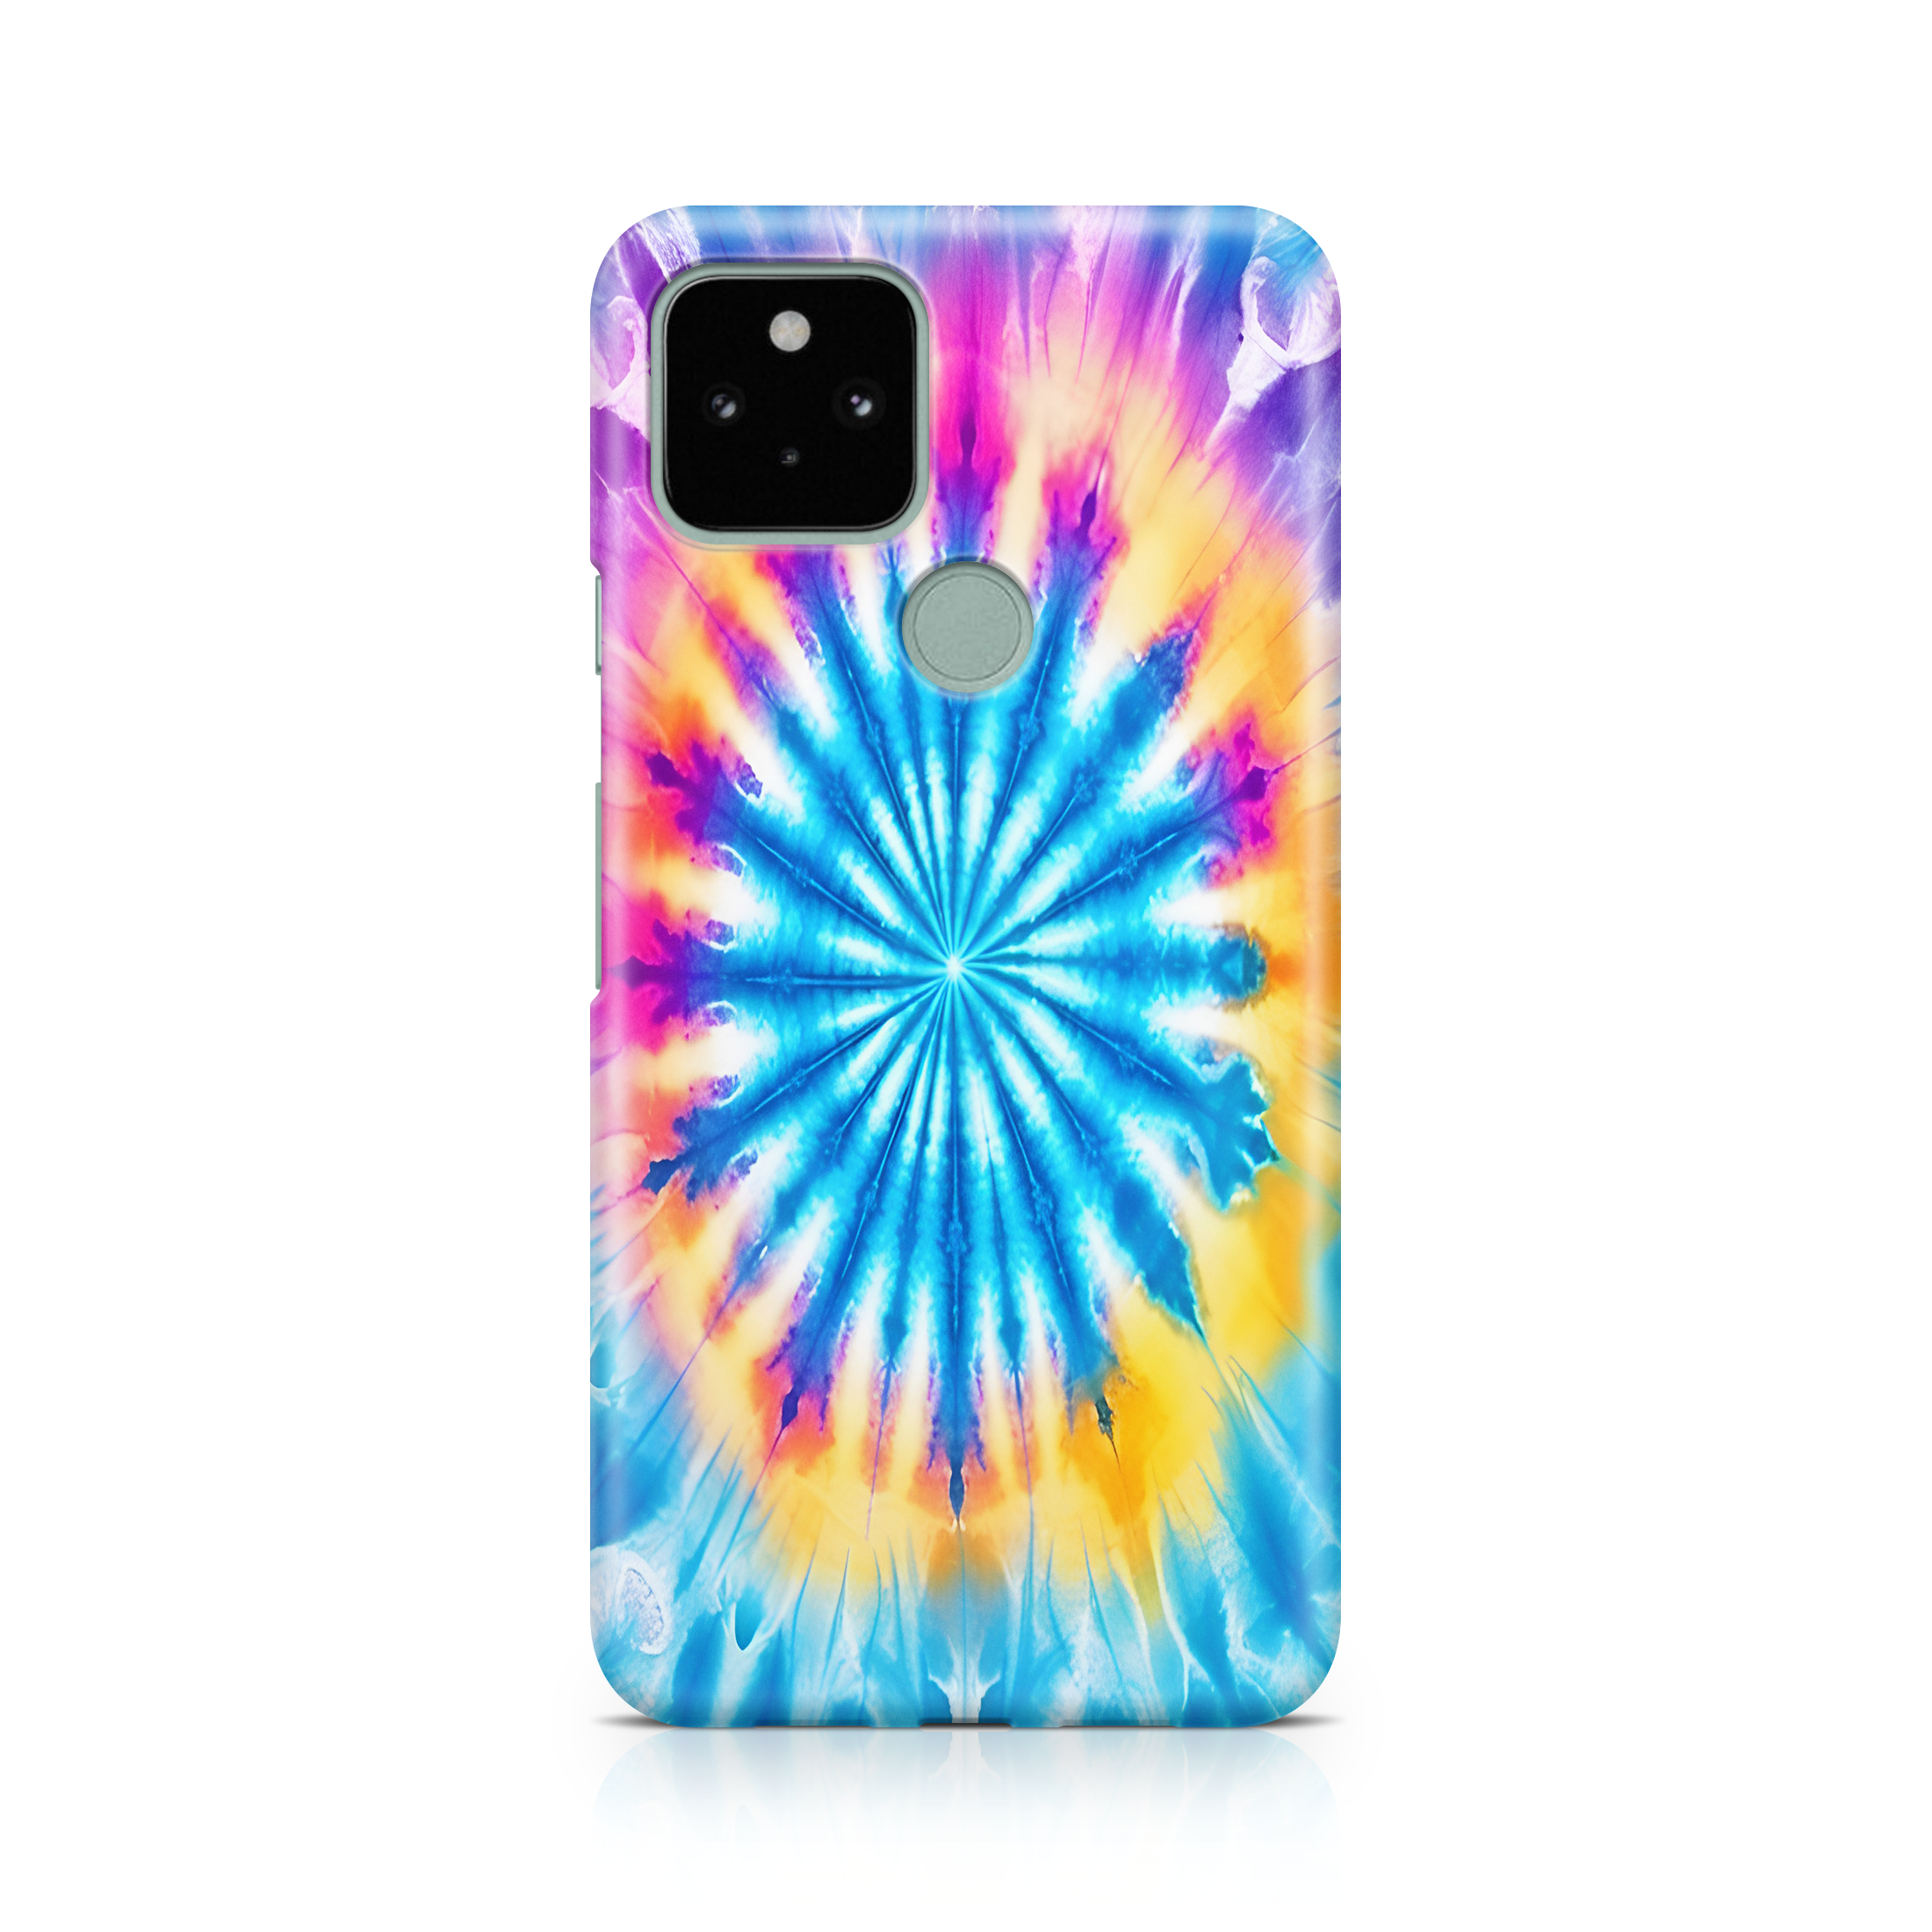 Hippie Tide - Google phone case designs by CaseSwagger